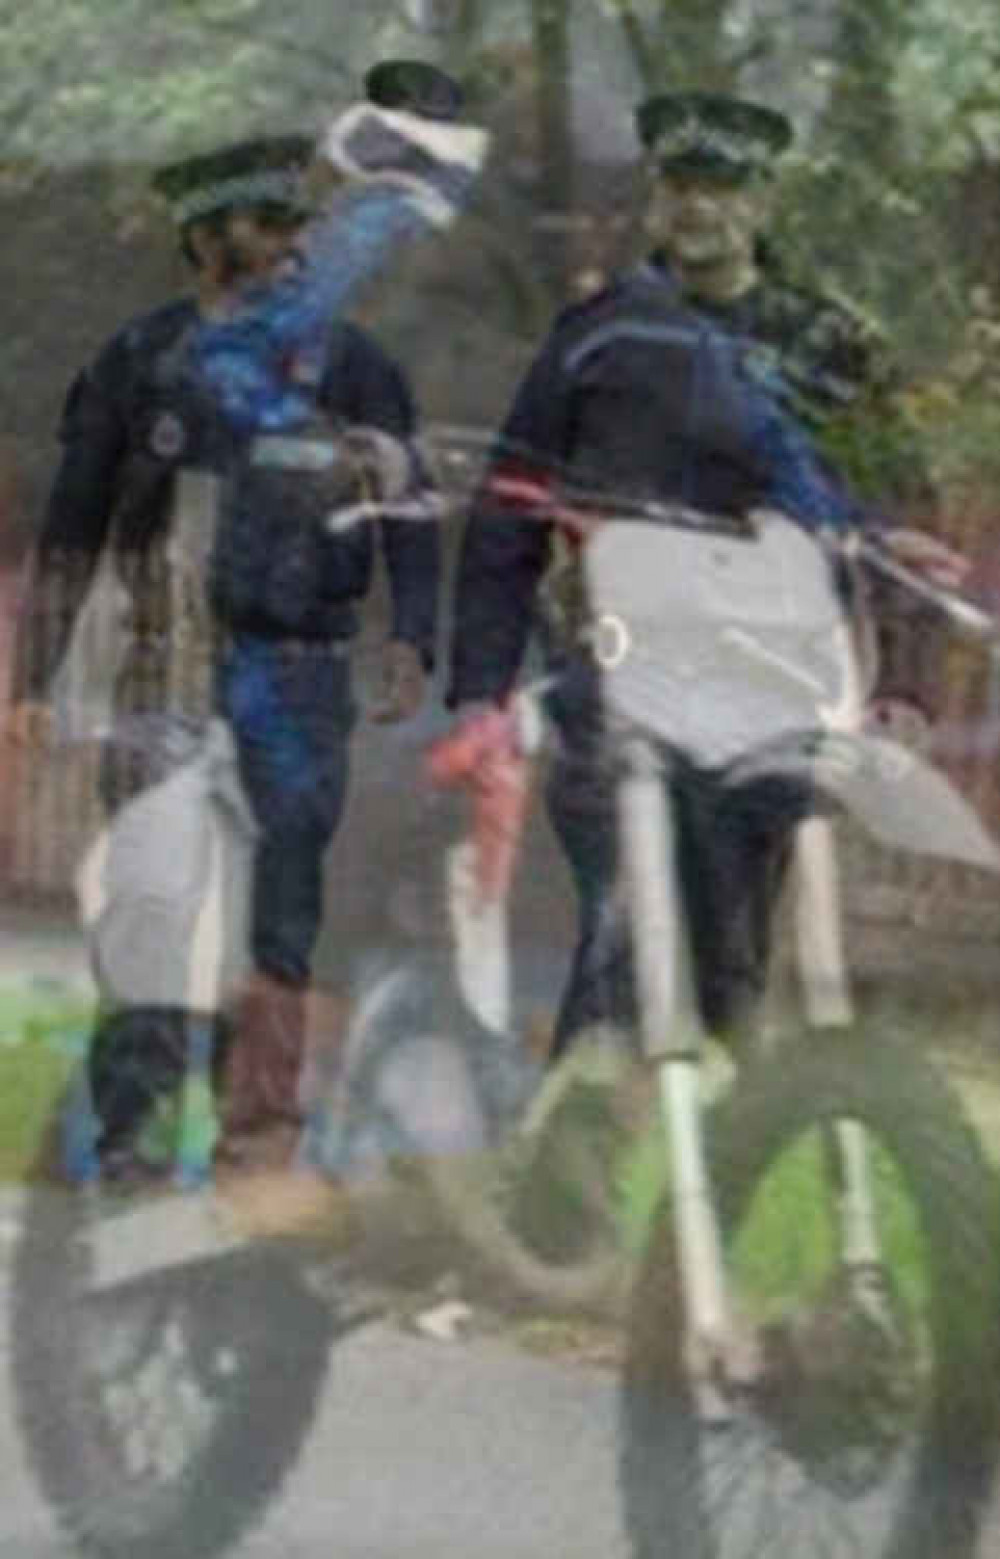 Police are urged to raise visibility to deter anti-social bike riders